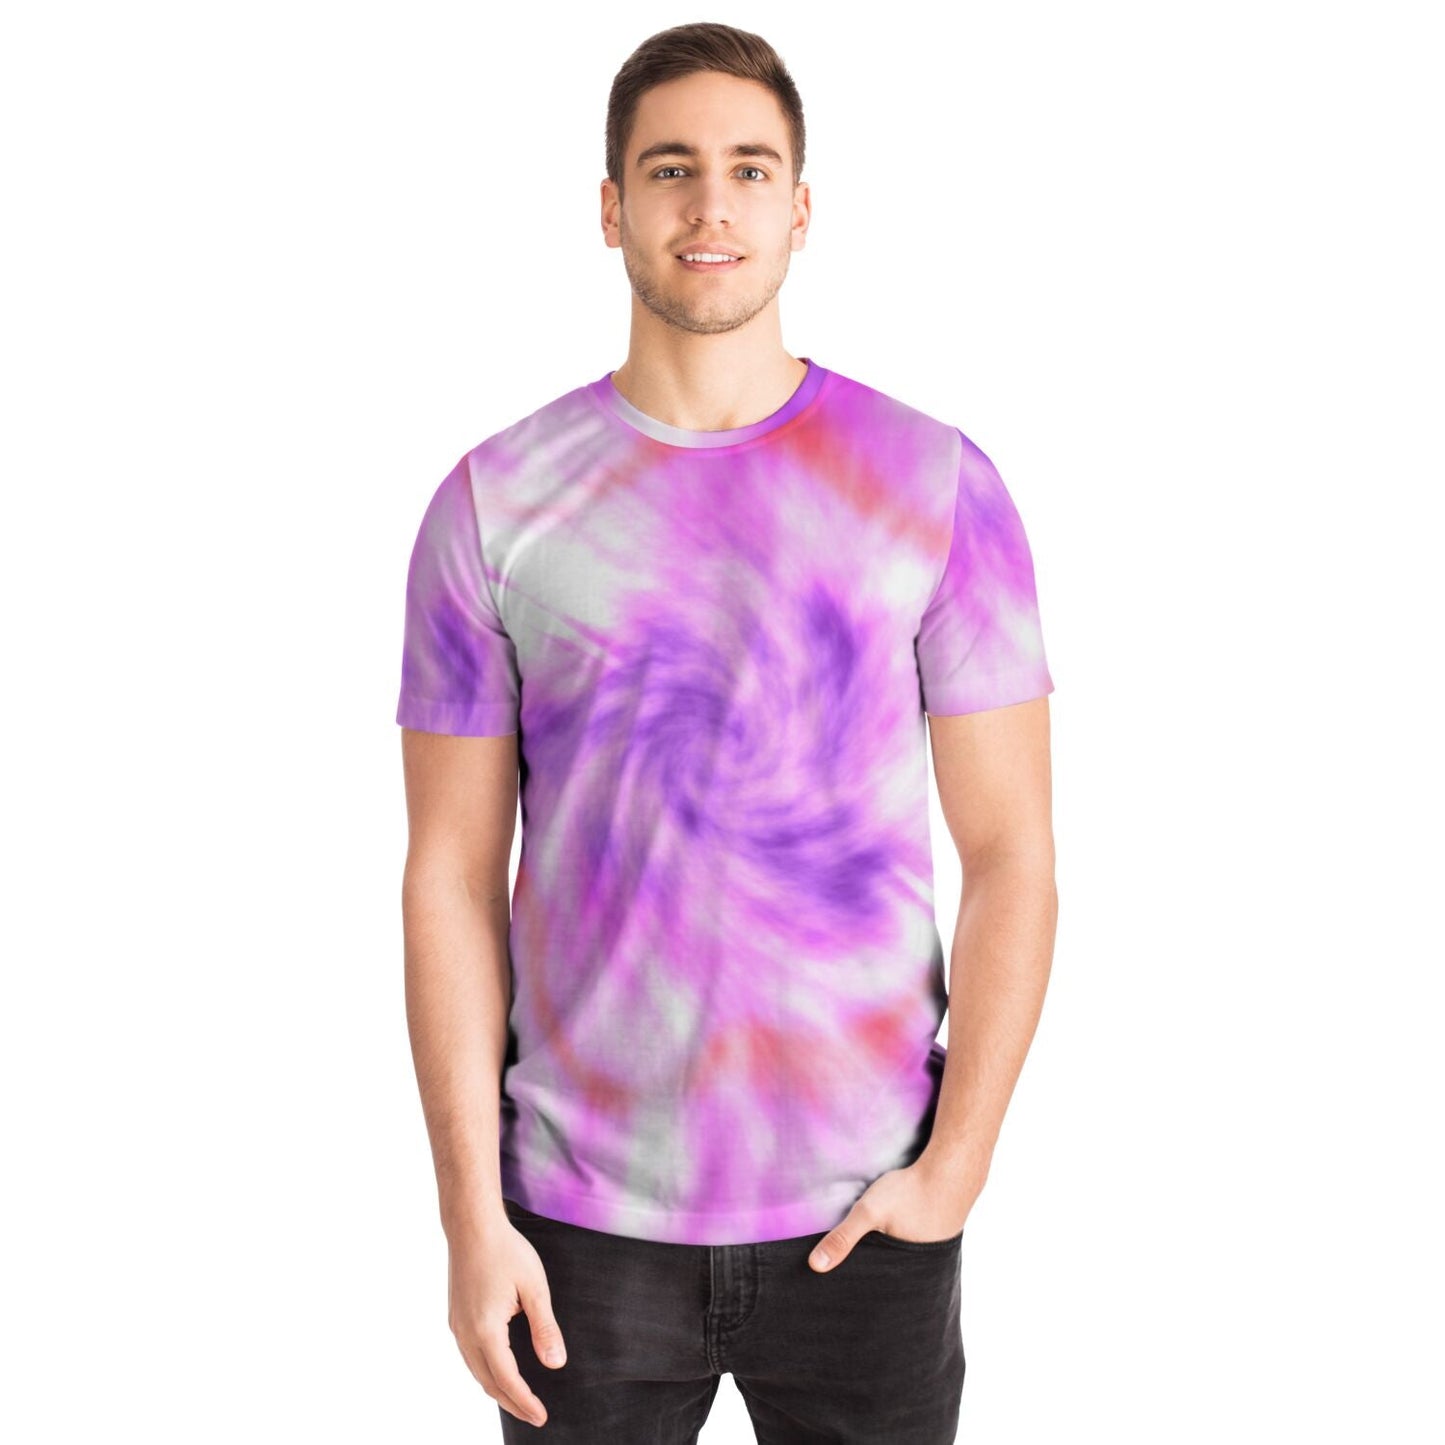 Tie Dyes - Purple and Oranges (Red River Gorge)